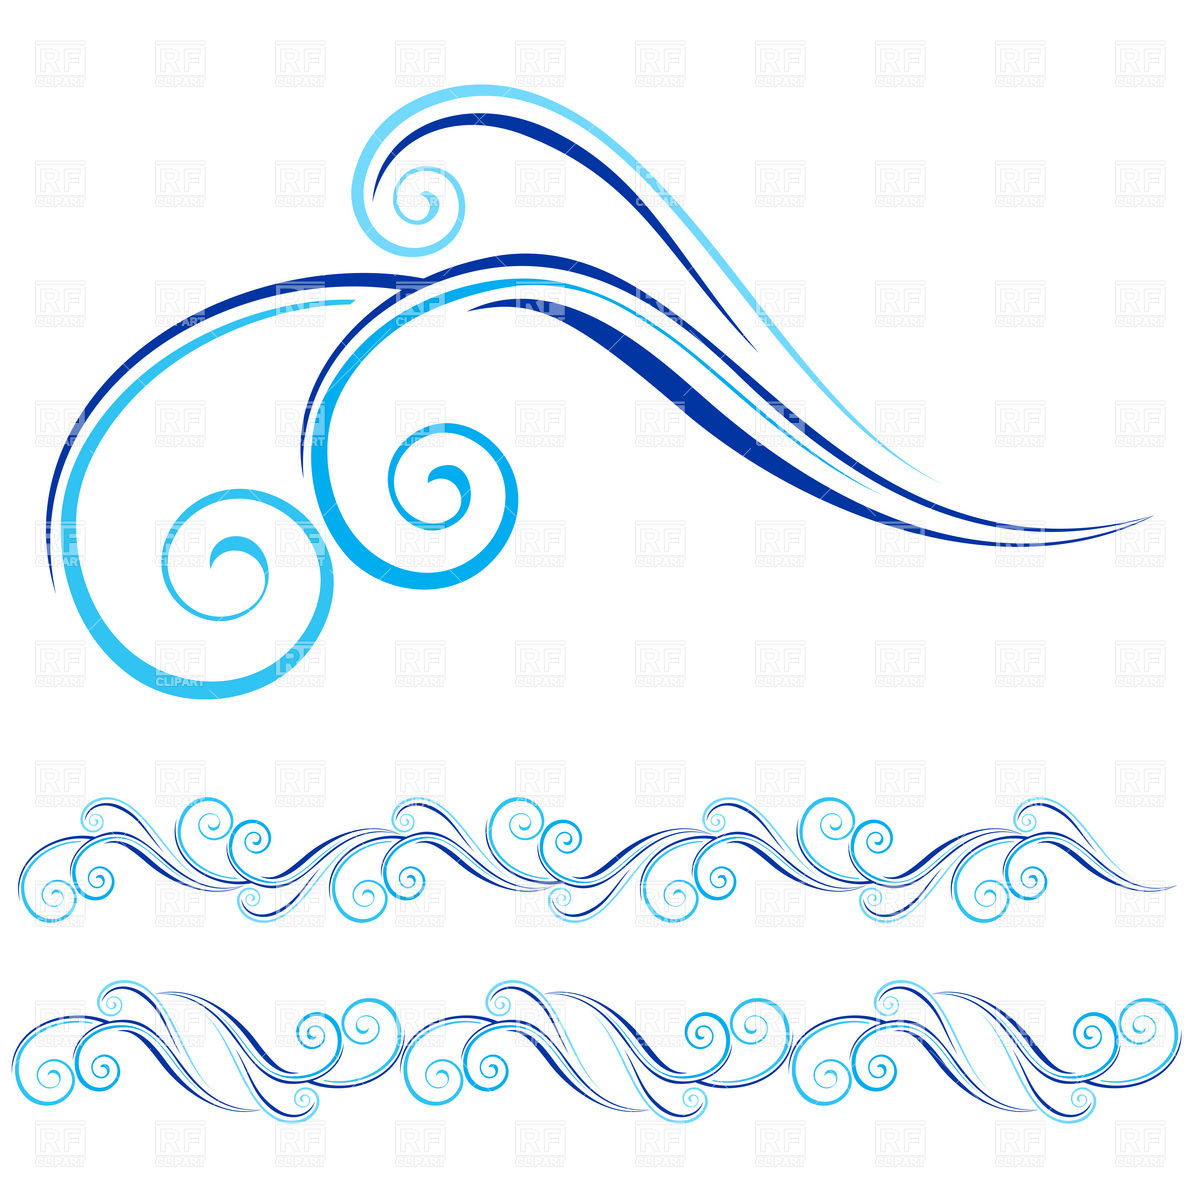 Curly Blue Wave Design Download Royalty Free Vector Clipart  Eps